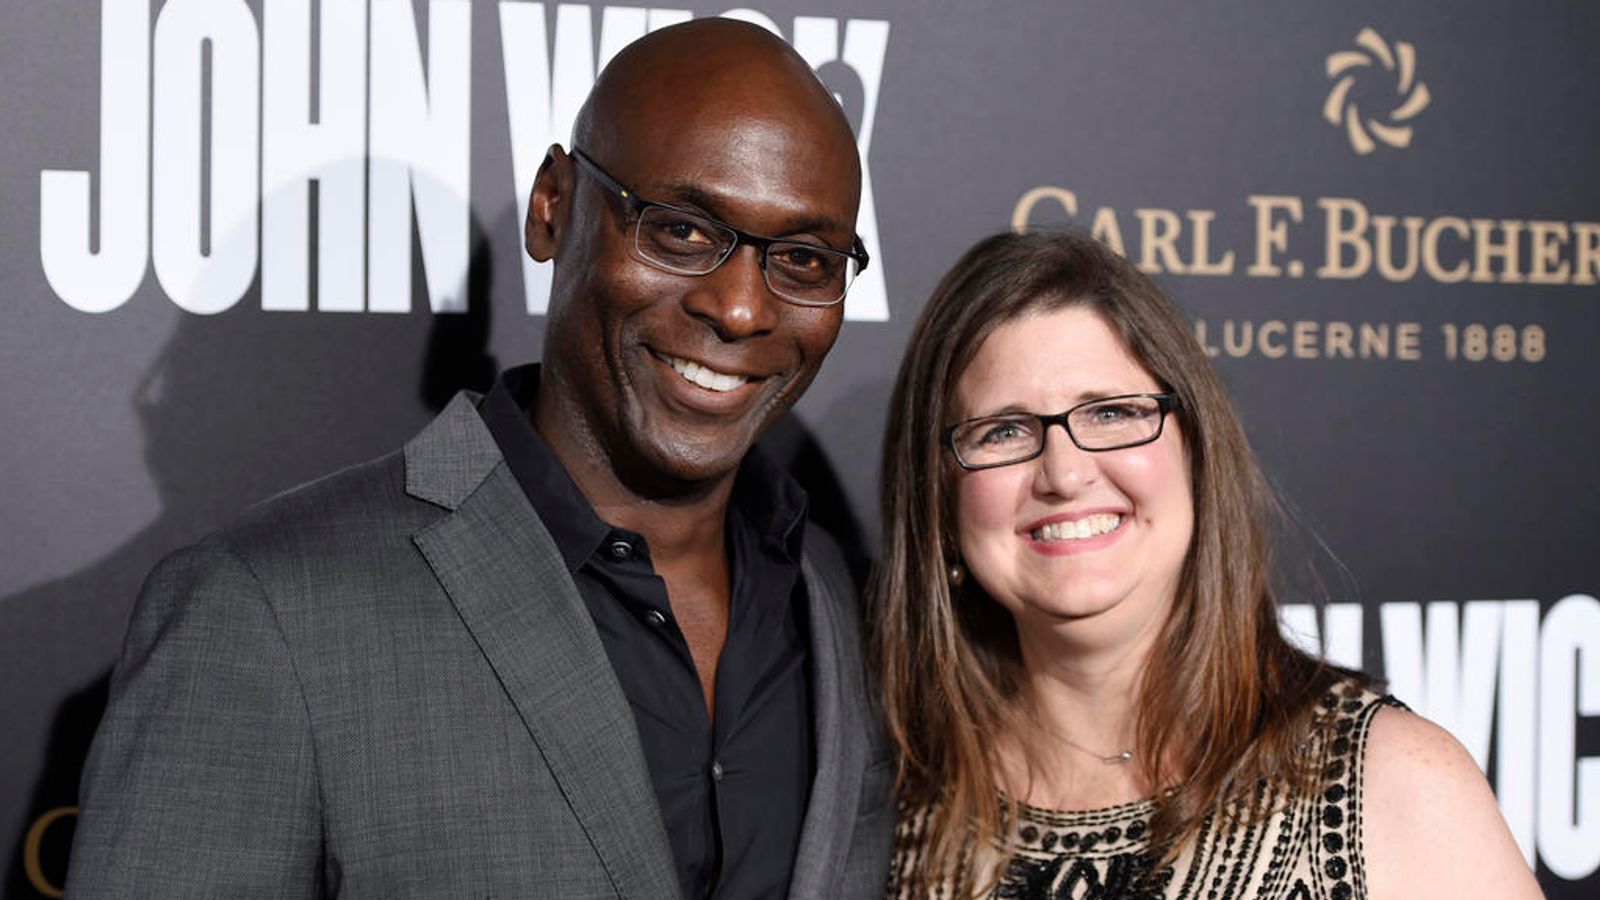 Lance Reddick's wife shares statement following actor's sudden death aged  60